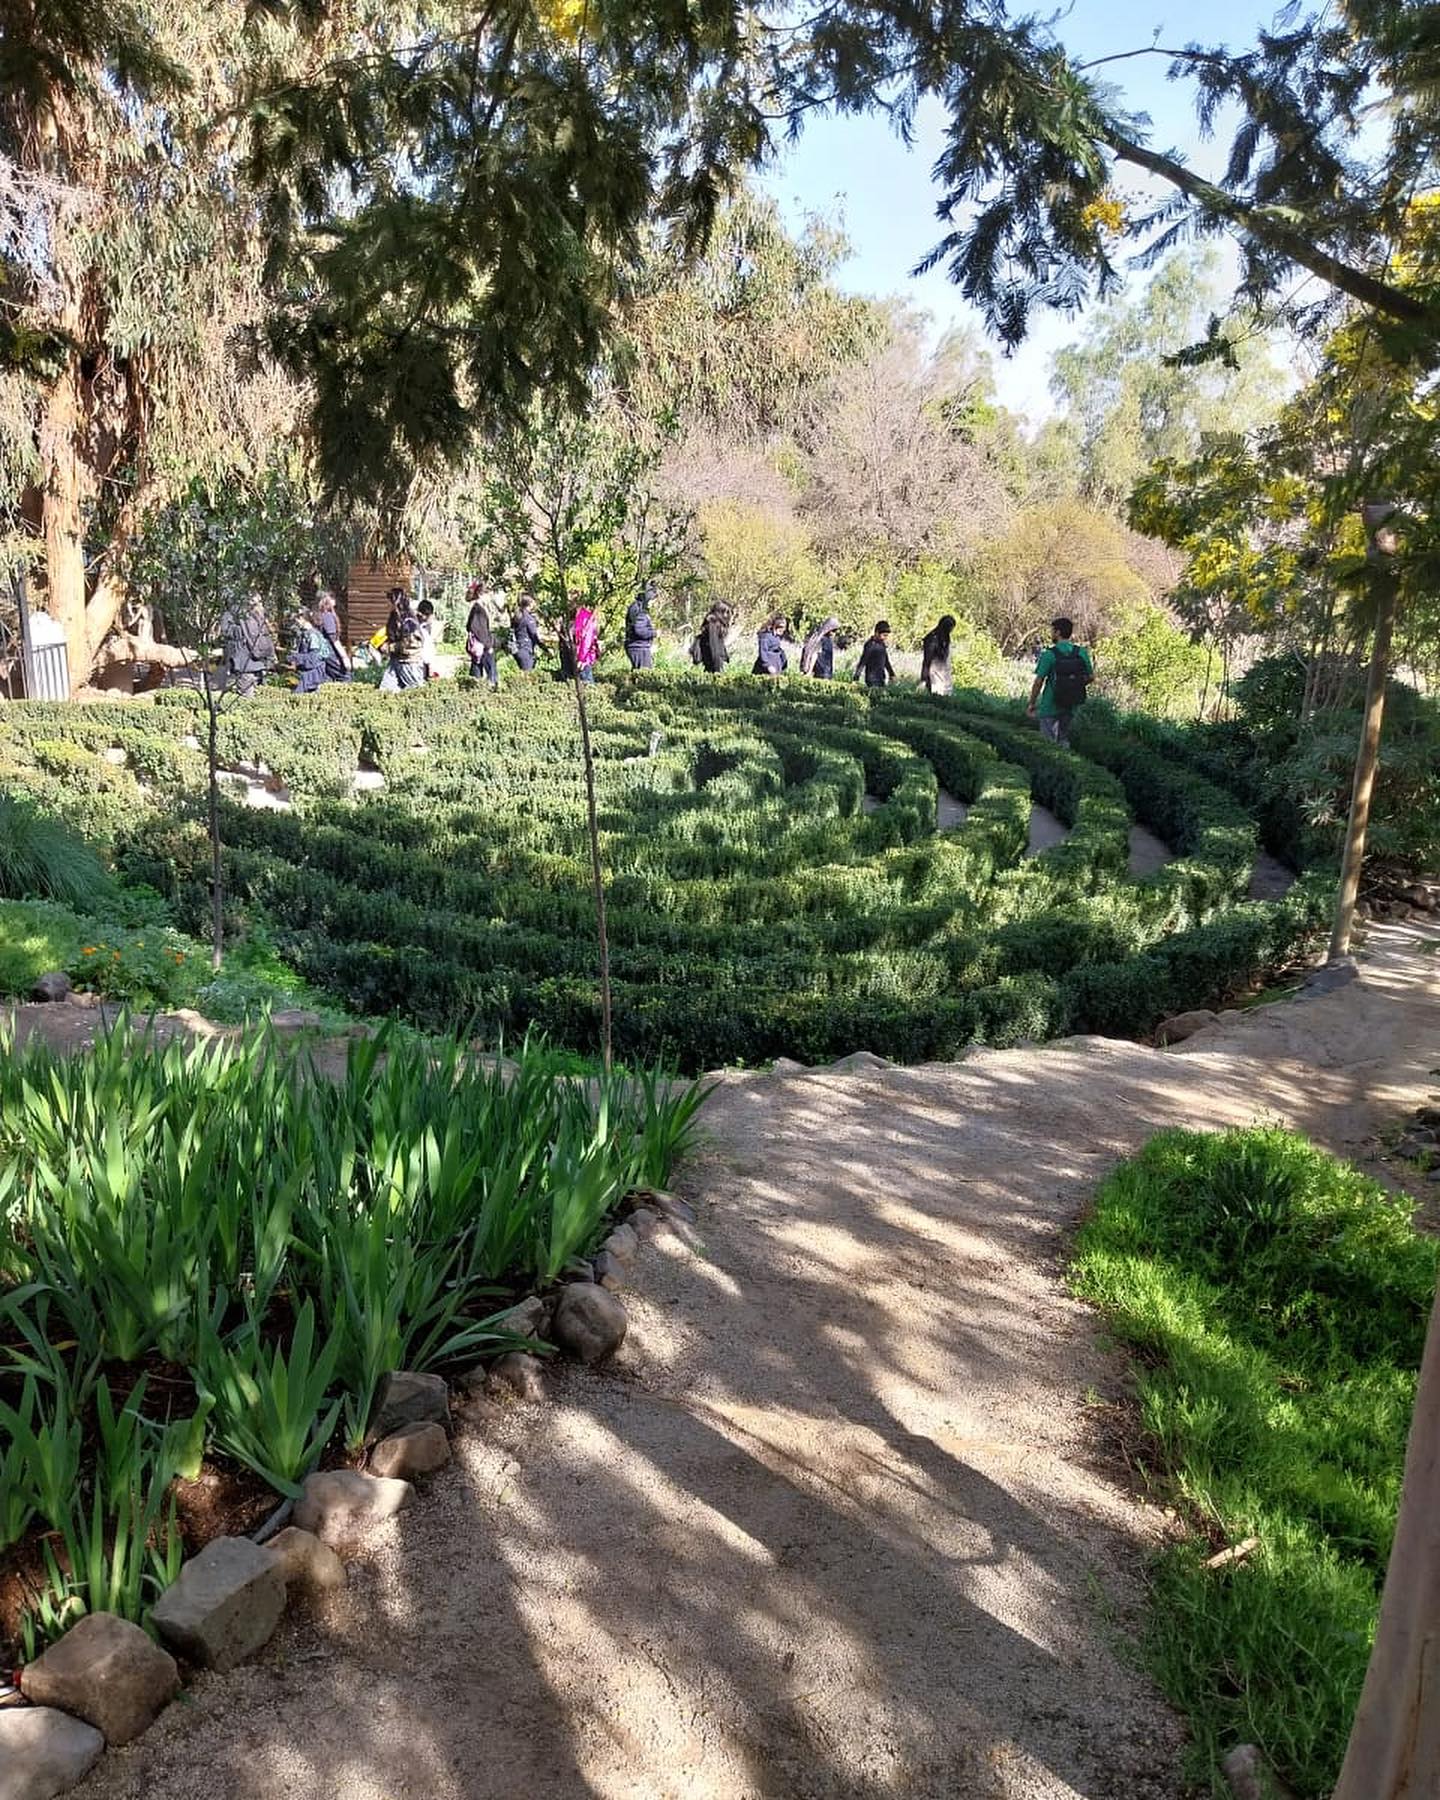 A group of people in the background of the Labyrinth with the shades from the nearby trees.